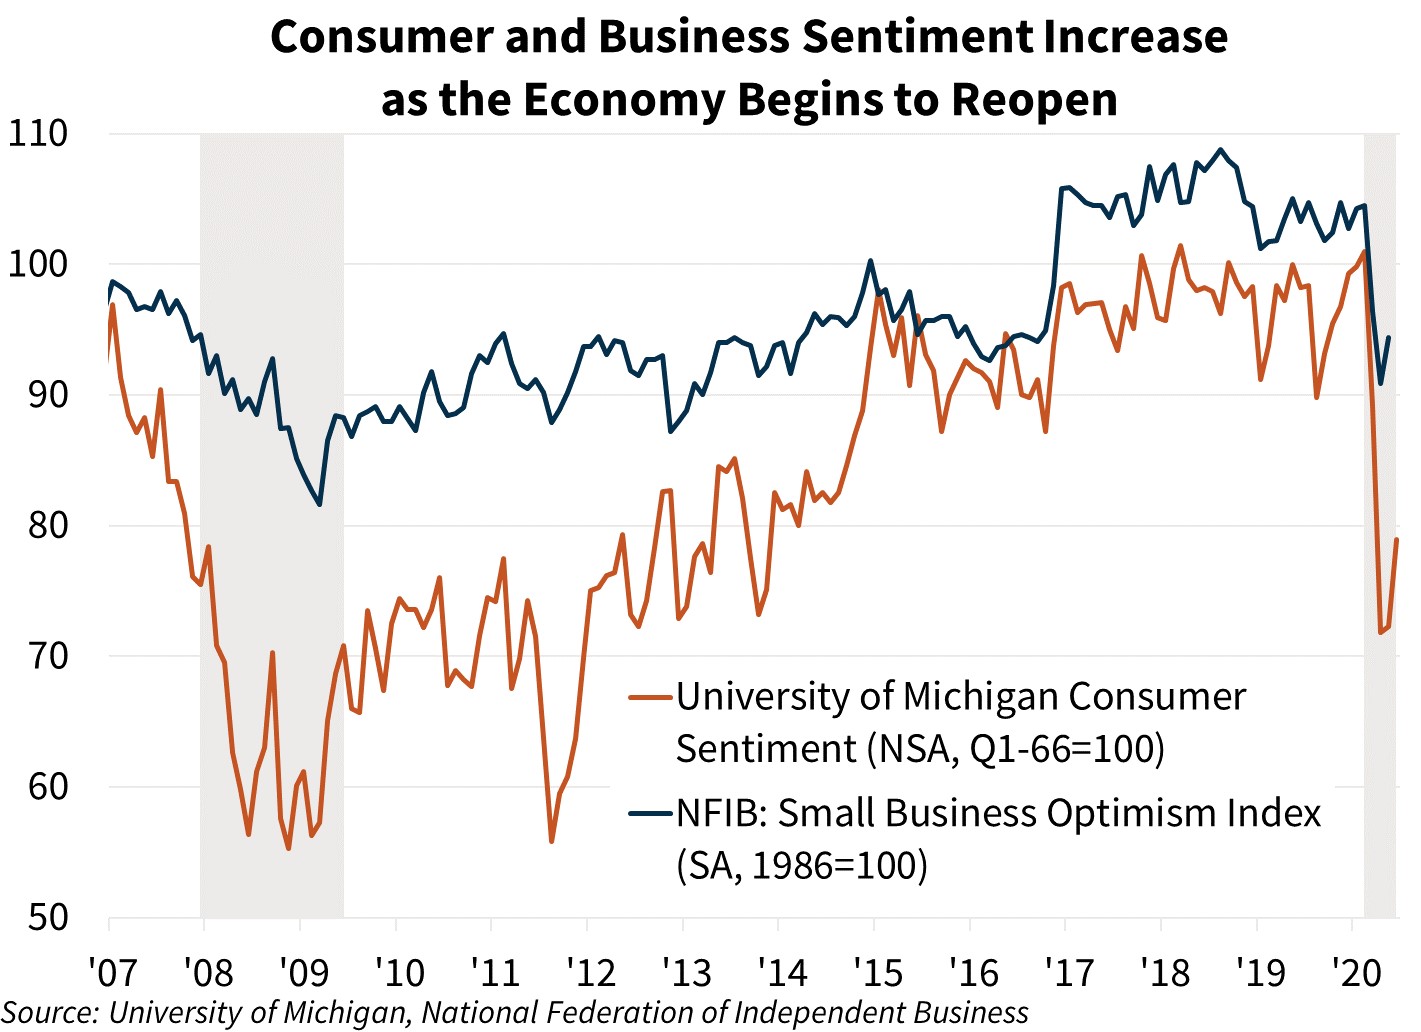 Consumer and Business Sentiment Increase as the Economy Begin to Reopen